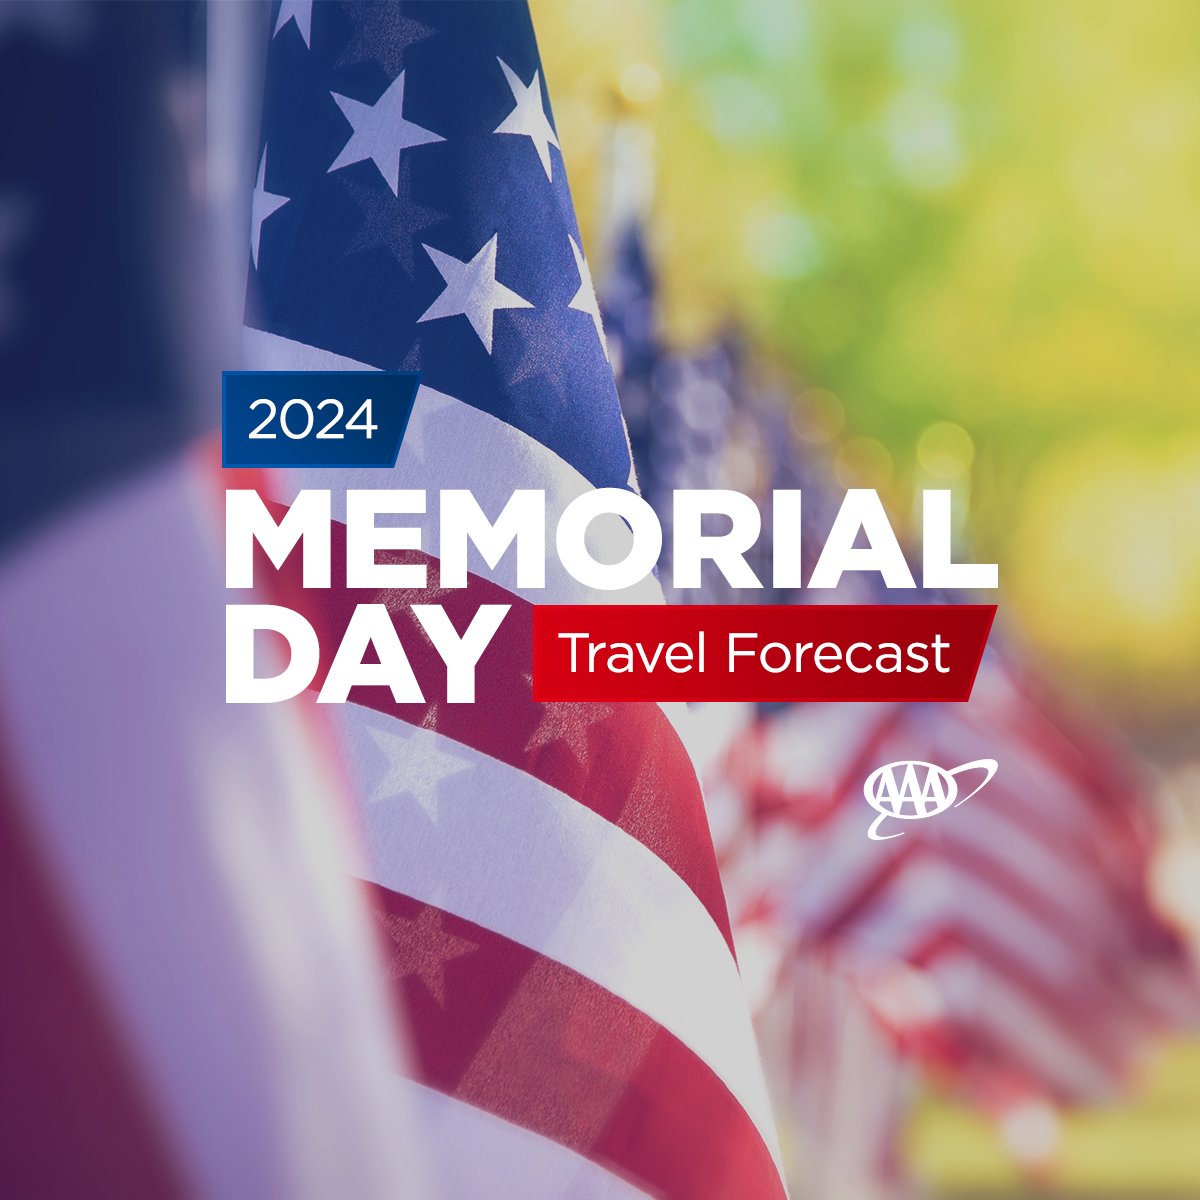 Will the number of #MemorialDay travelers break records this year? Find out on Monday, May 13 as #AAA releases its annual travel forecast for the kickoff weekend for summer travel. #SummerTravel #Roadtrip @travelks @FlyICT @Fly_KansasCity @FlyMHK @KansasTurnpike @AAAClubAlliance